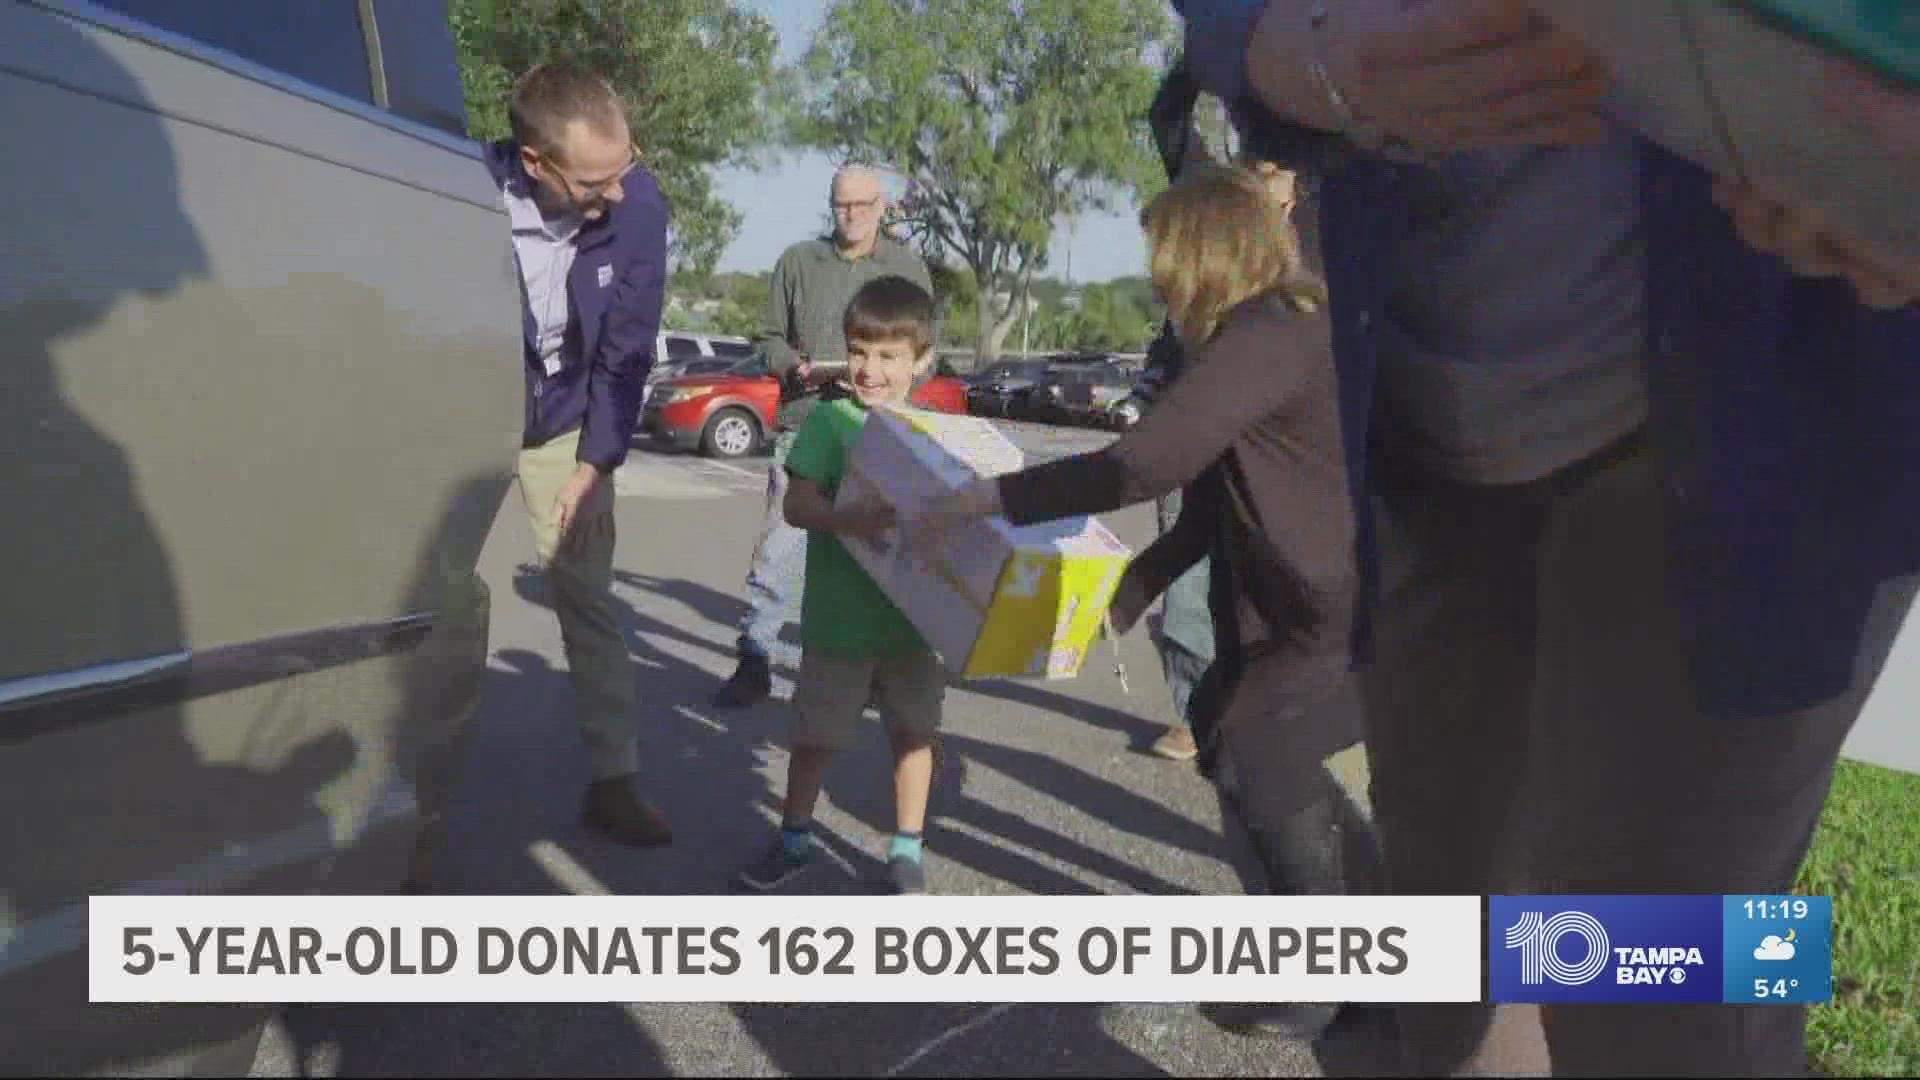 The donations came in all thanks to a local 5-year-old boy.